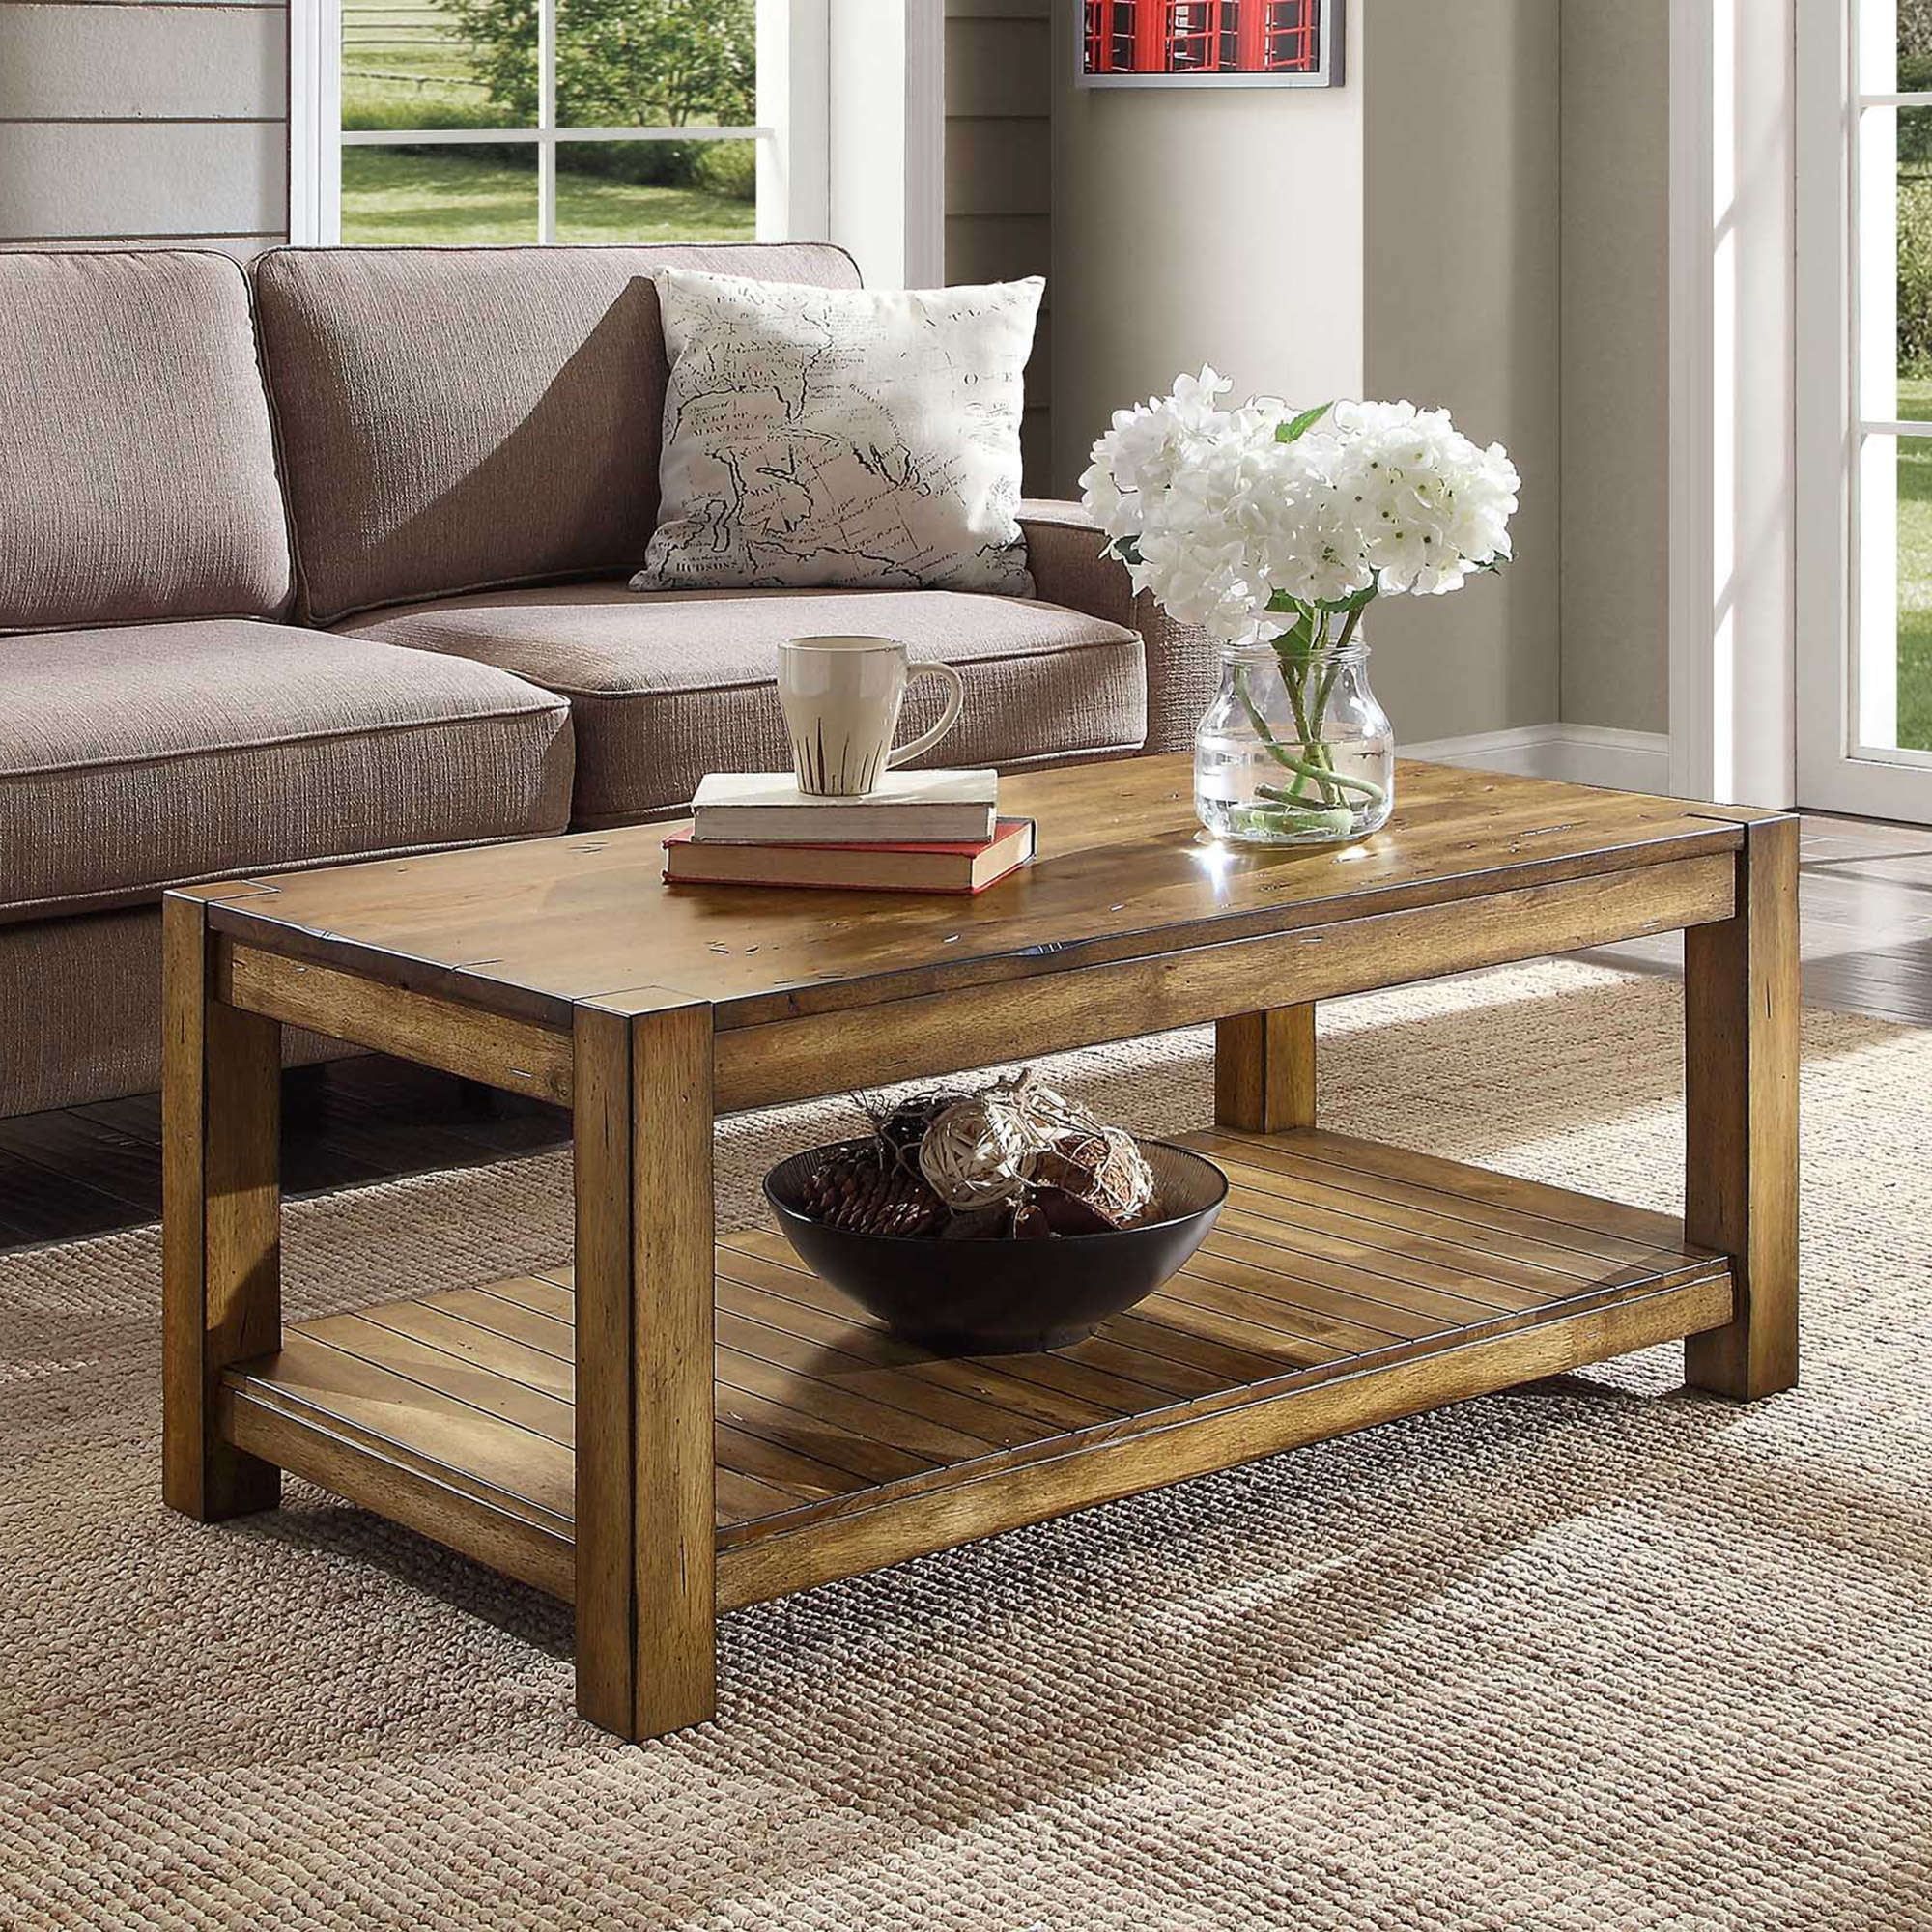 Bryant Solid Wood Coffee Table, Rustic Maple Brown Finish – Walmart In Brown Rustic Coffee Tables (View 2 of 20)